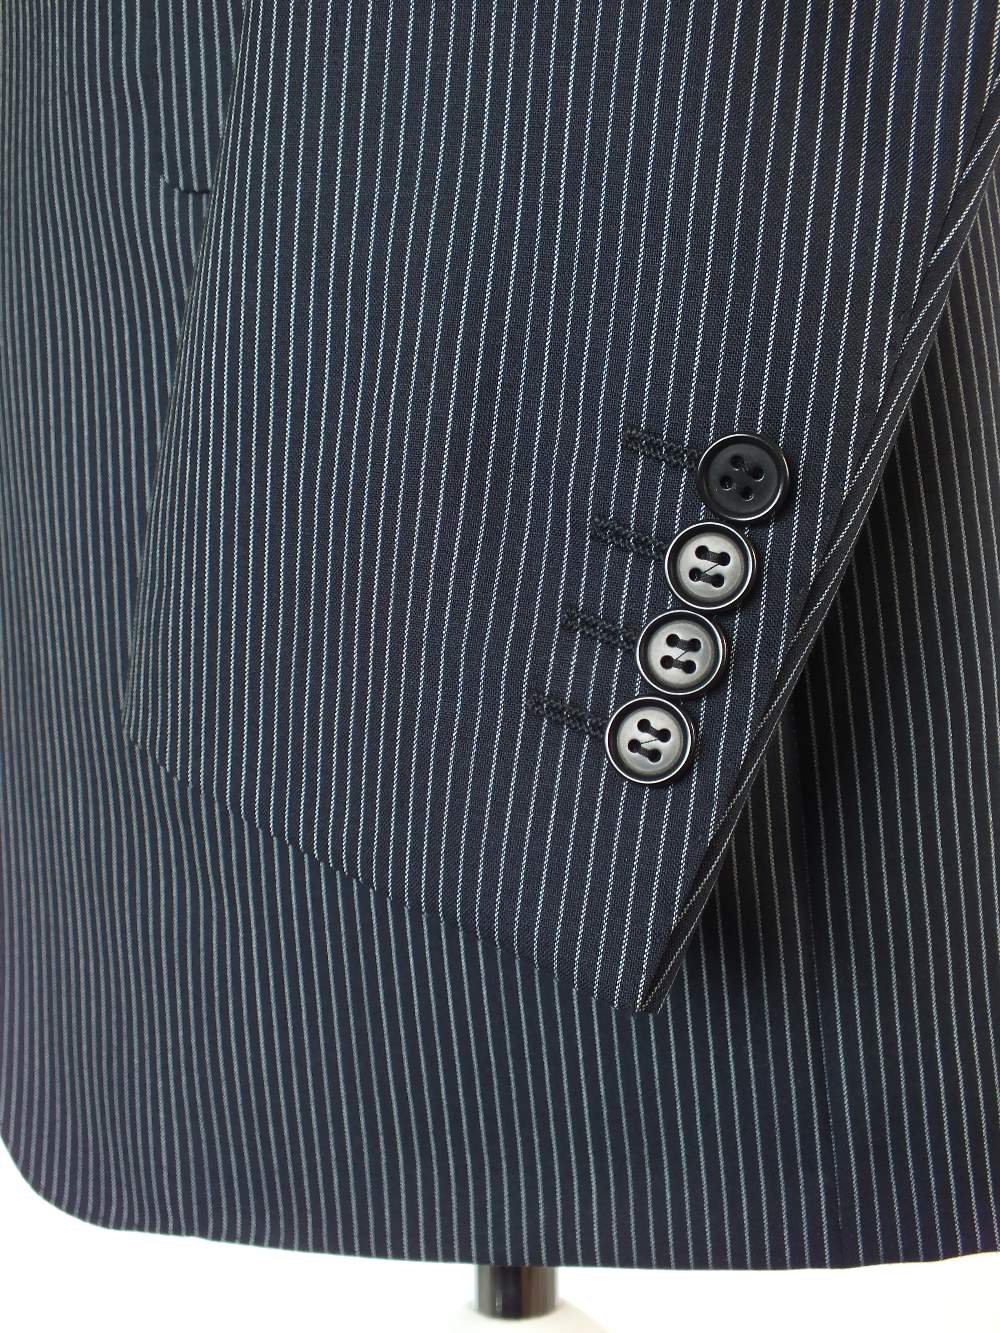 A Canali suit, navy pinstripe, single vent, Italian size 50R, 100% wool, flat front to trousers - Image 5 of 6